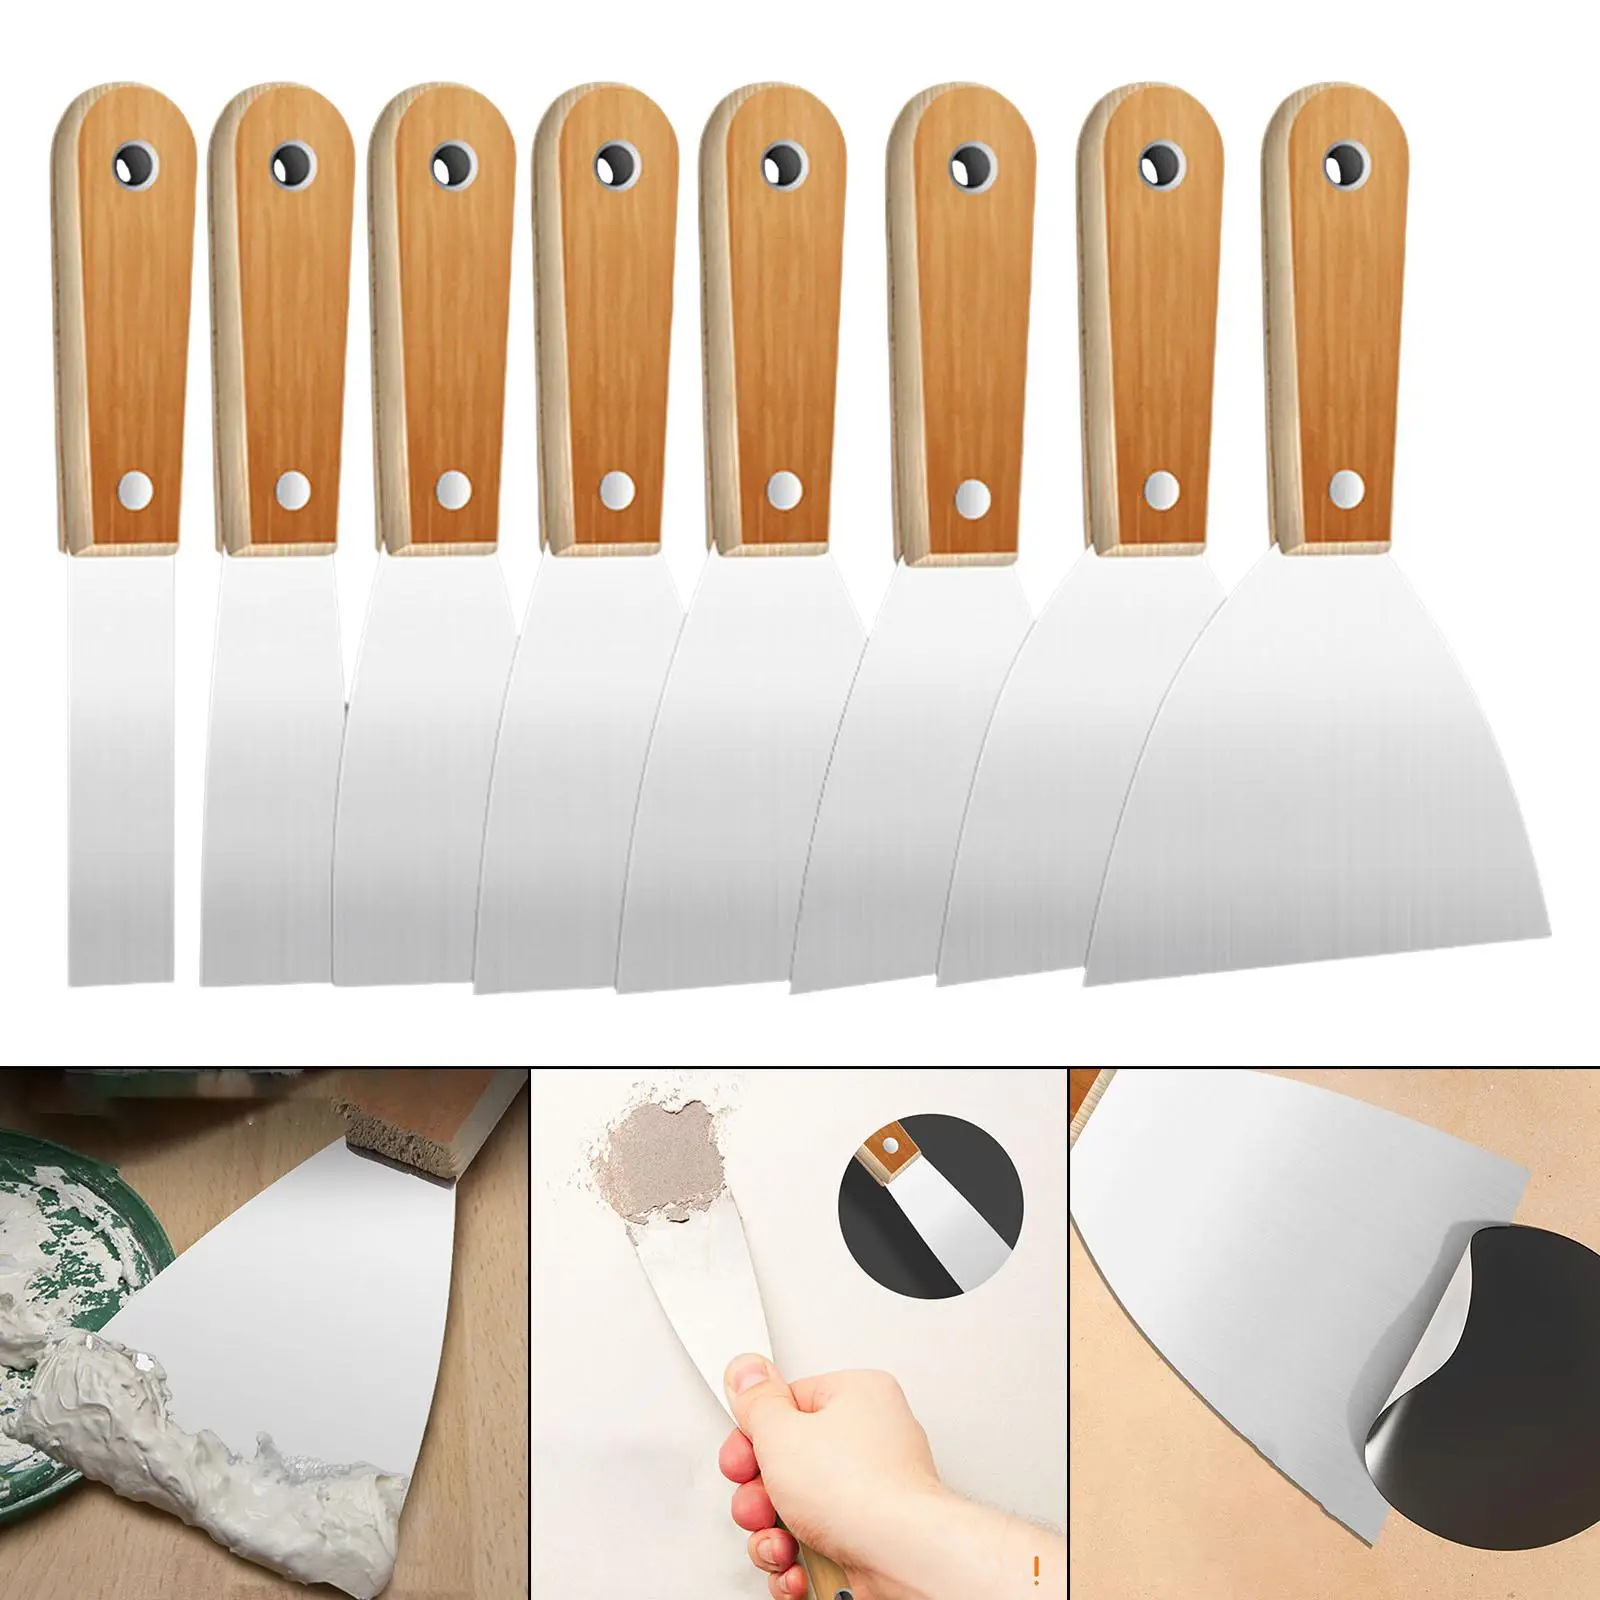 8x Putty Scrapers Shovel Hand Construction Tools Spatula Wallpaper Scraper for Spreading Wall Cleaning Decorating Filling